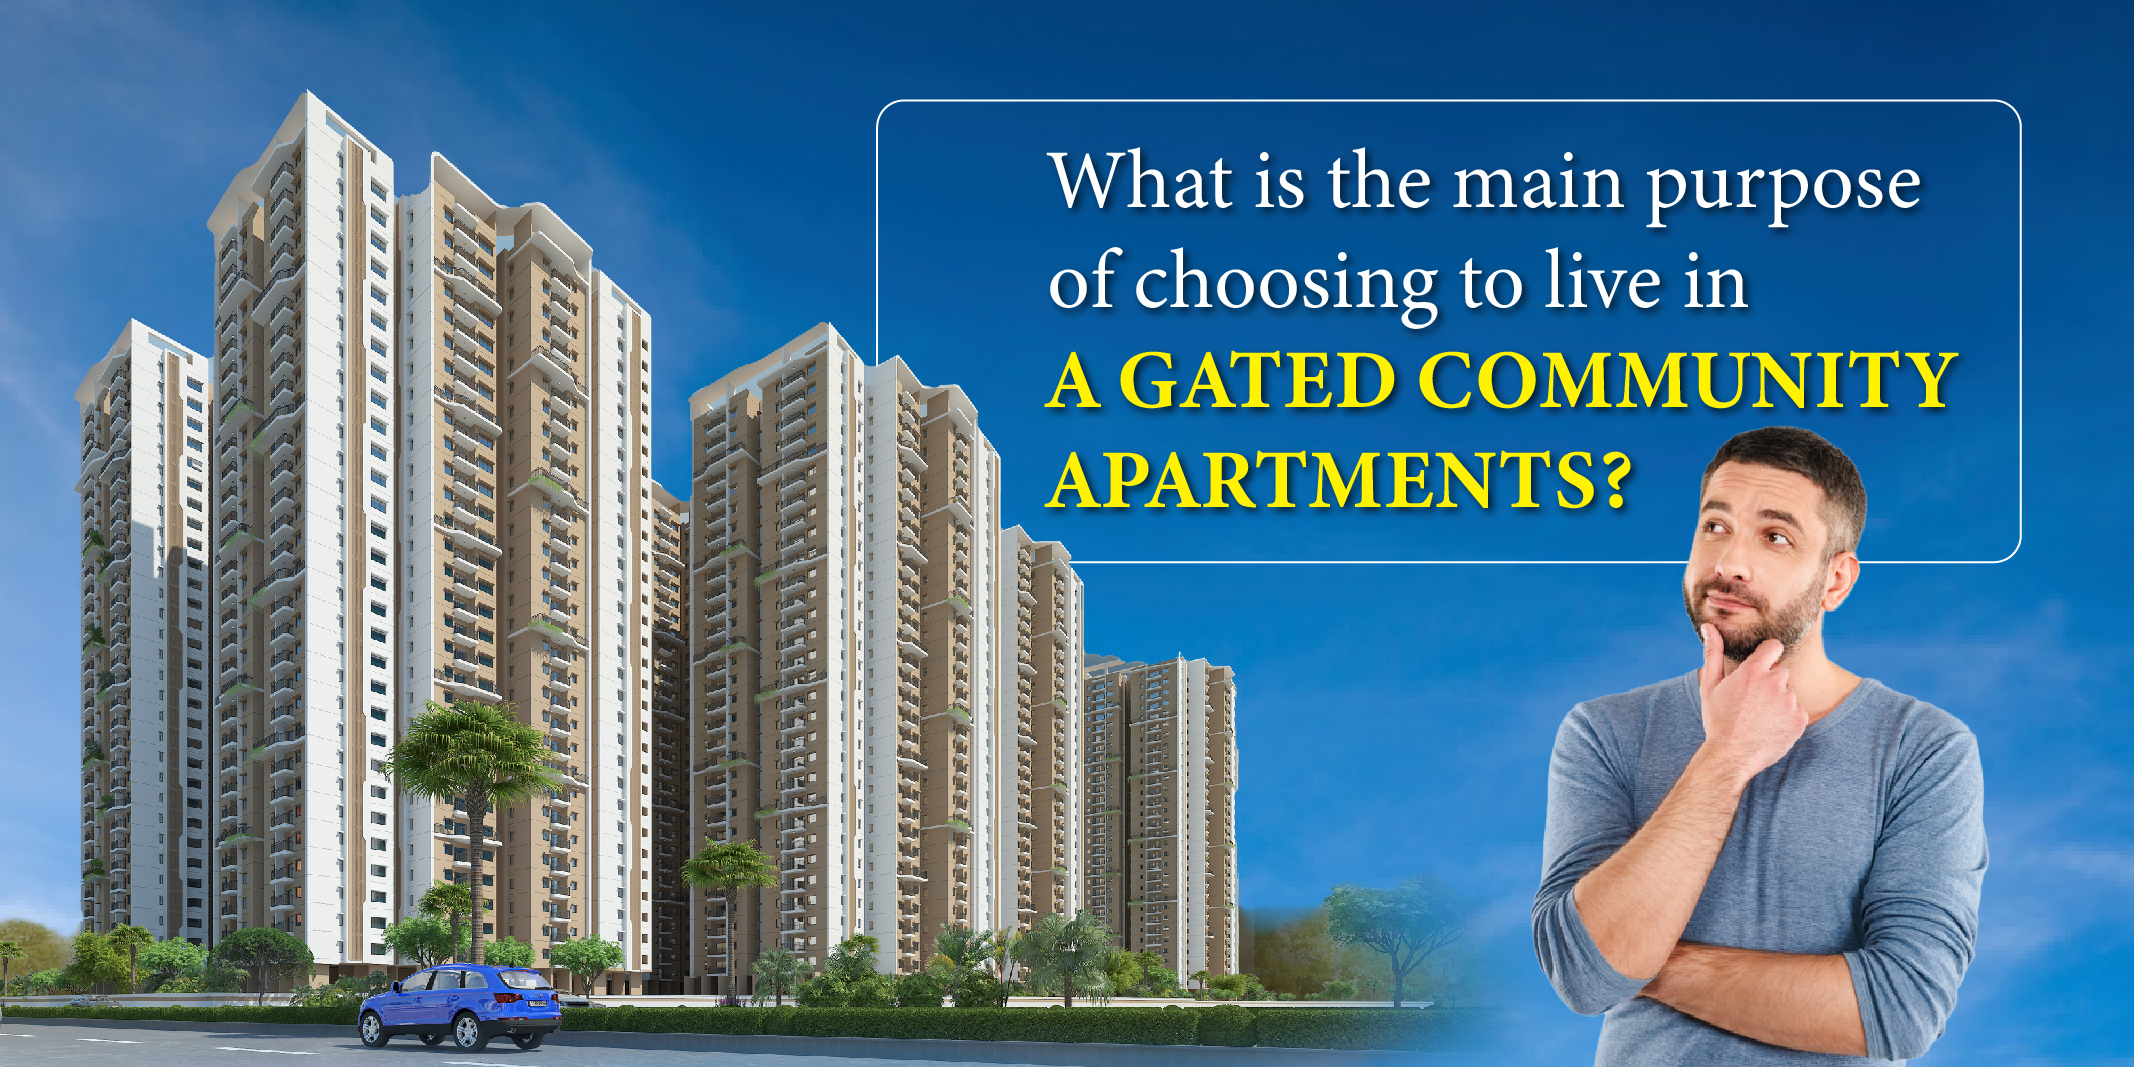 What is the main purpose of choosing to live in a gated community Apartments